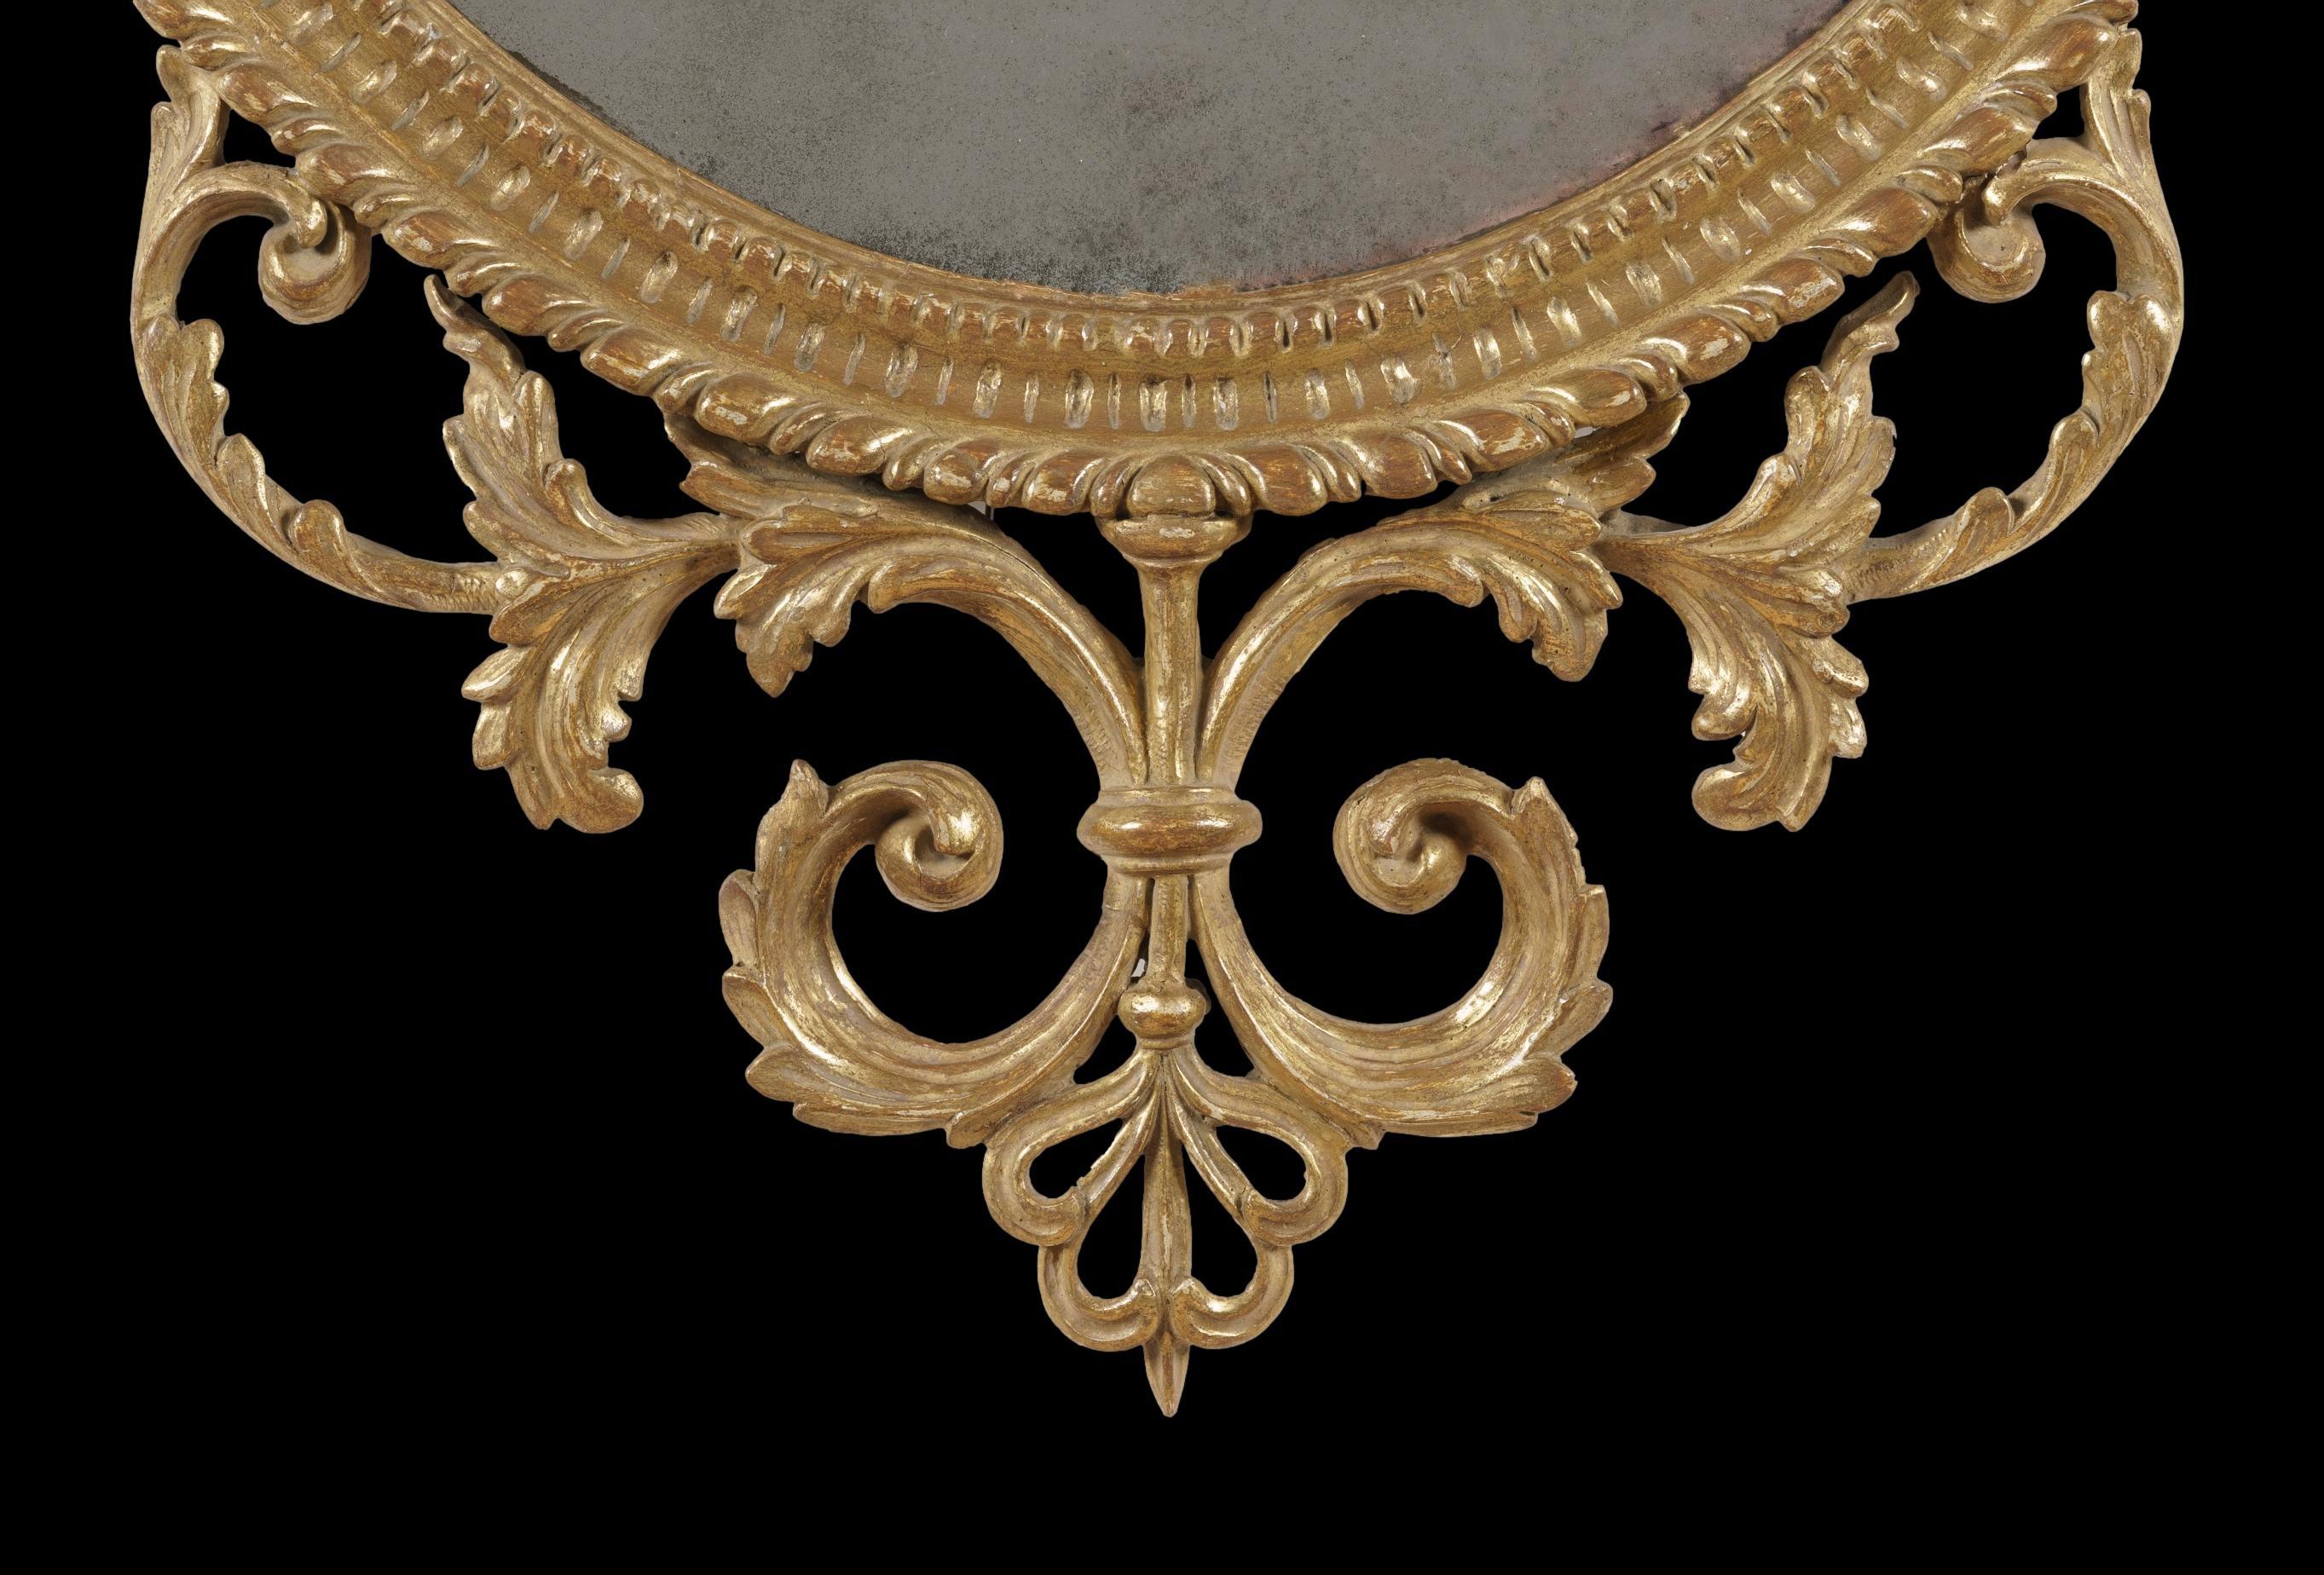 A fine mirror in the George III manner

Constructed from giltwood, housing an oval mirror plate within a carved moulding, the top and base issuing scrolling acanthus leaves, a central vase motif above with draped bellflower husks adorning the